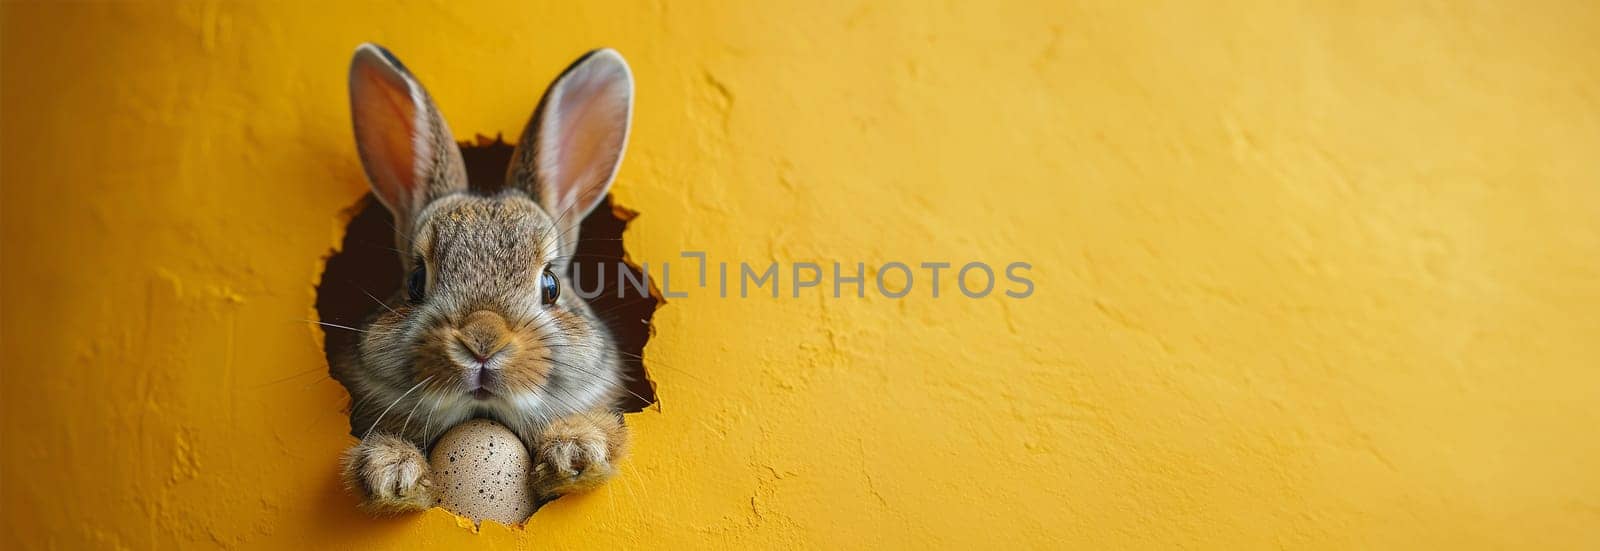 Cartoon cute bunny looking out of a cut hole bright yellow background. illustration. Spring holiday and Easter background. Copy space Happy Easter by Annebel146